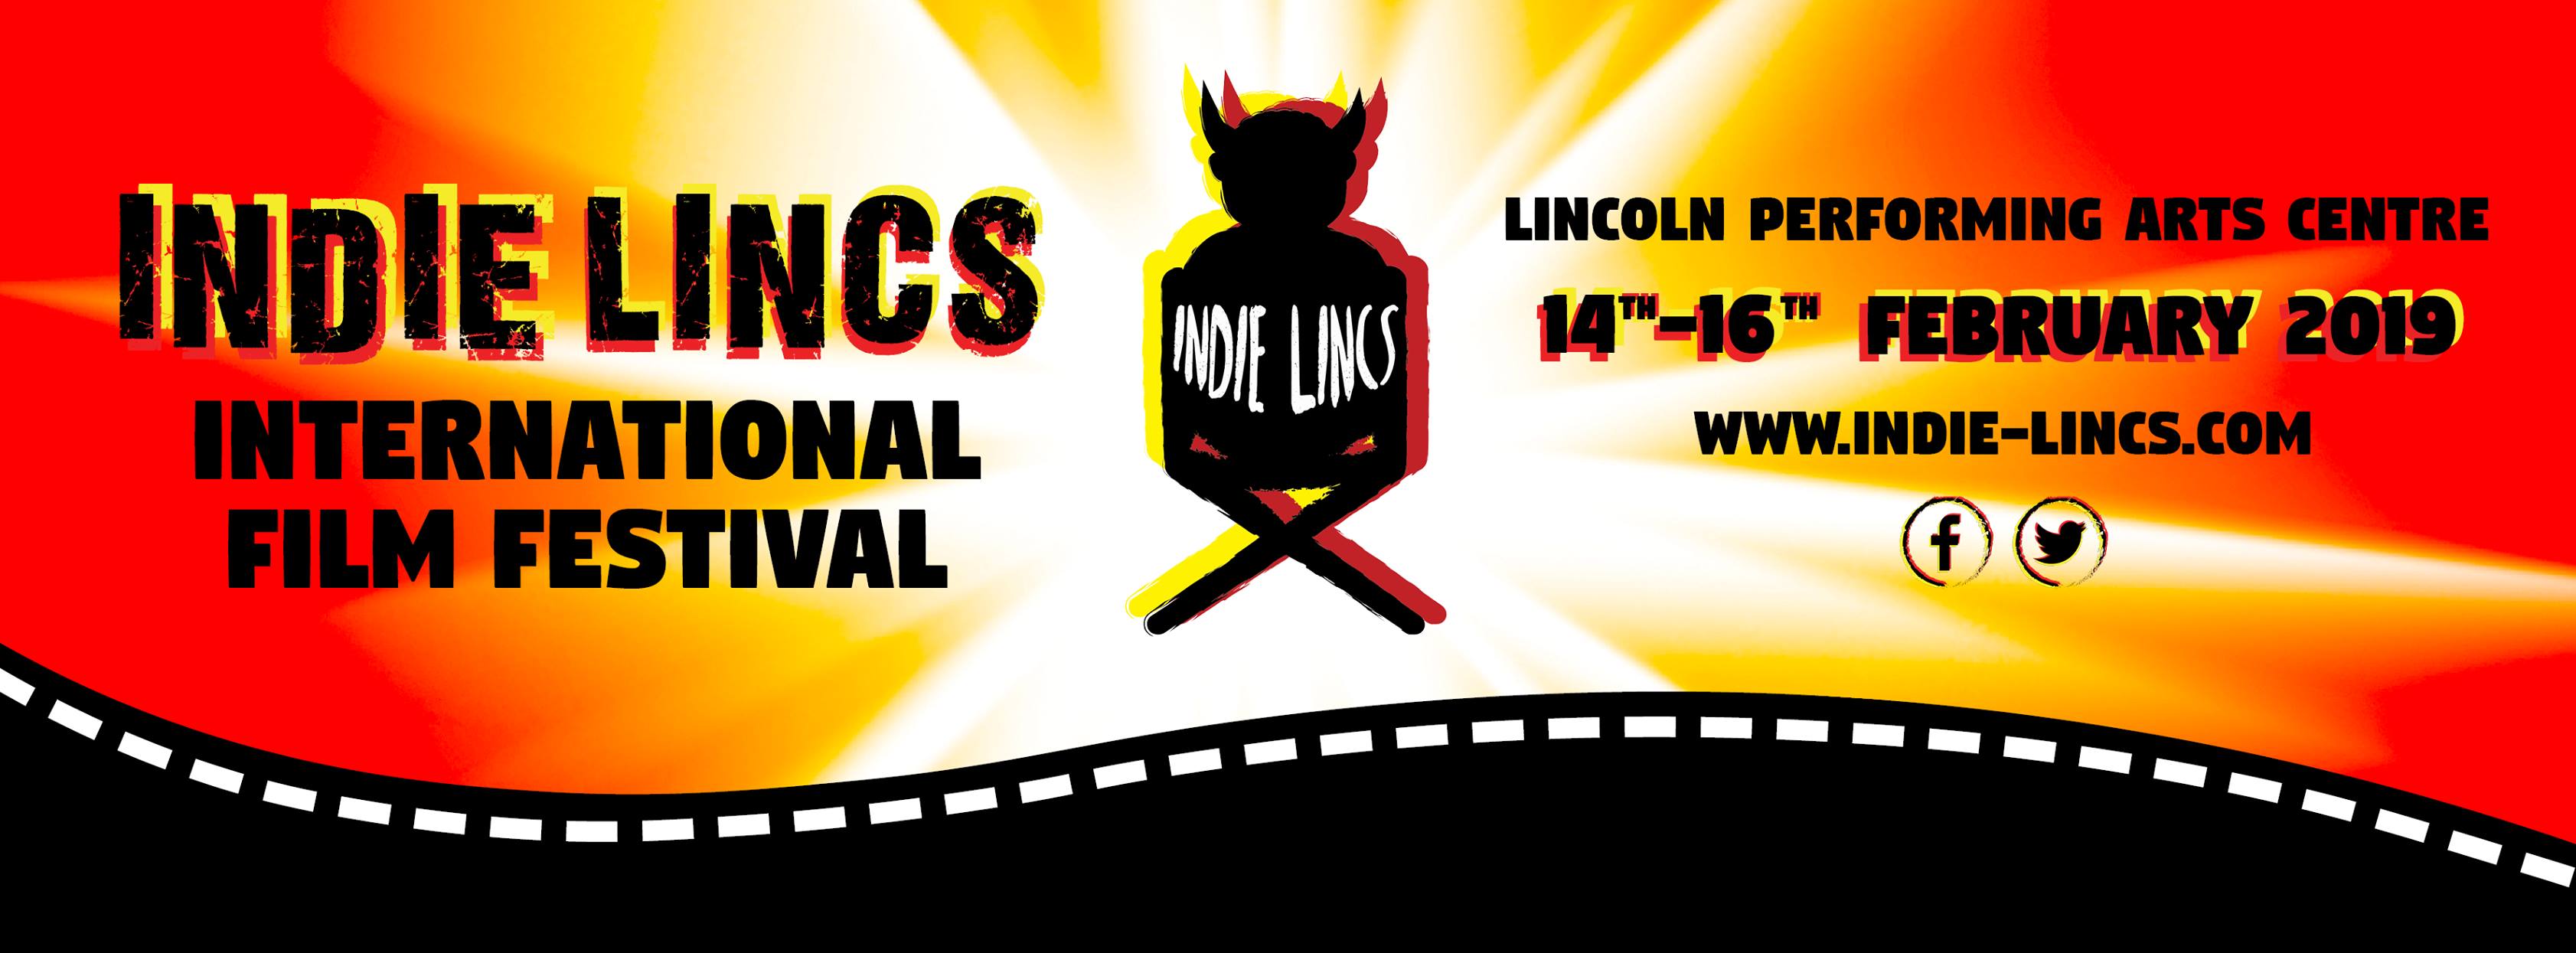 Indie Lincs is taking place this weekend